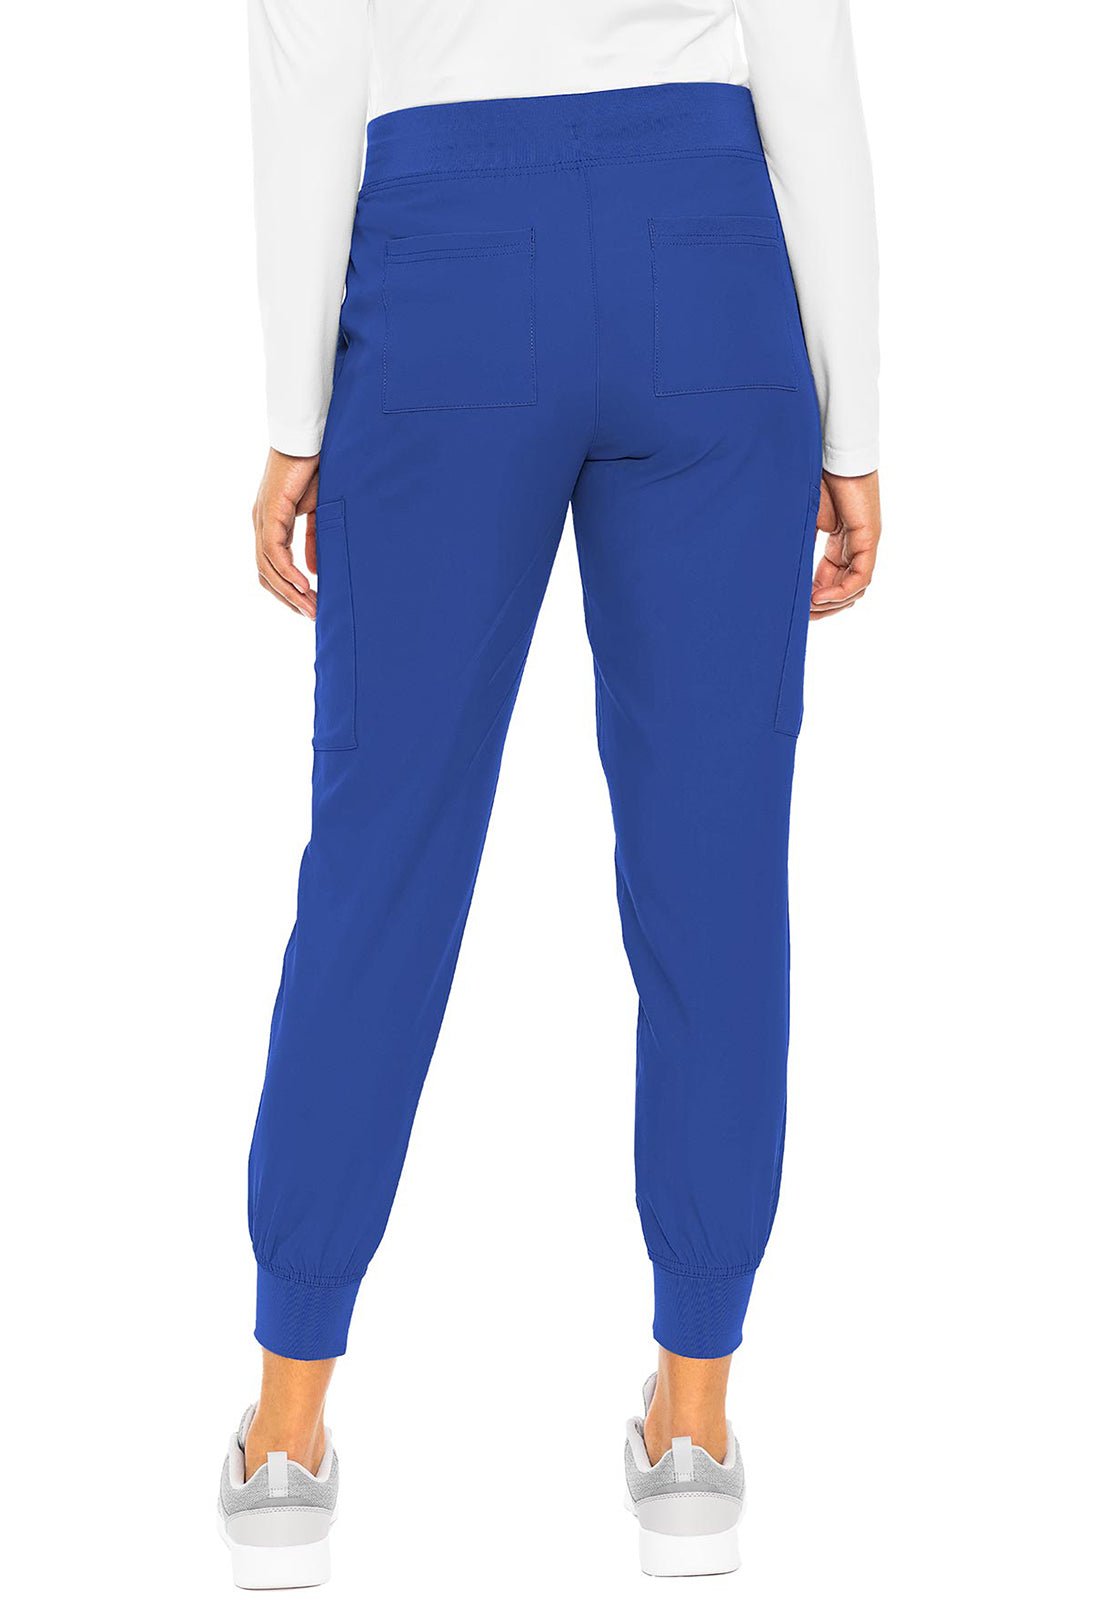 Med Couture Insight Jogger Scrub Pant MC2711 in Black, Navy, Pewter, Royal - Scrubs Select